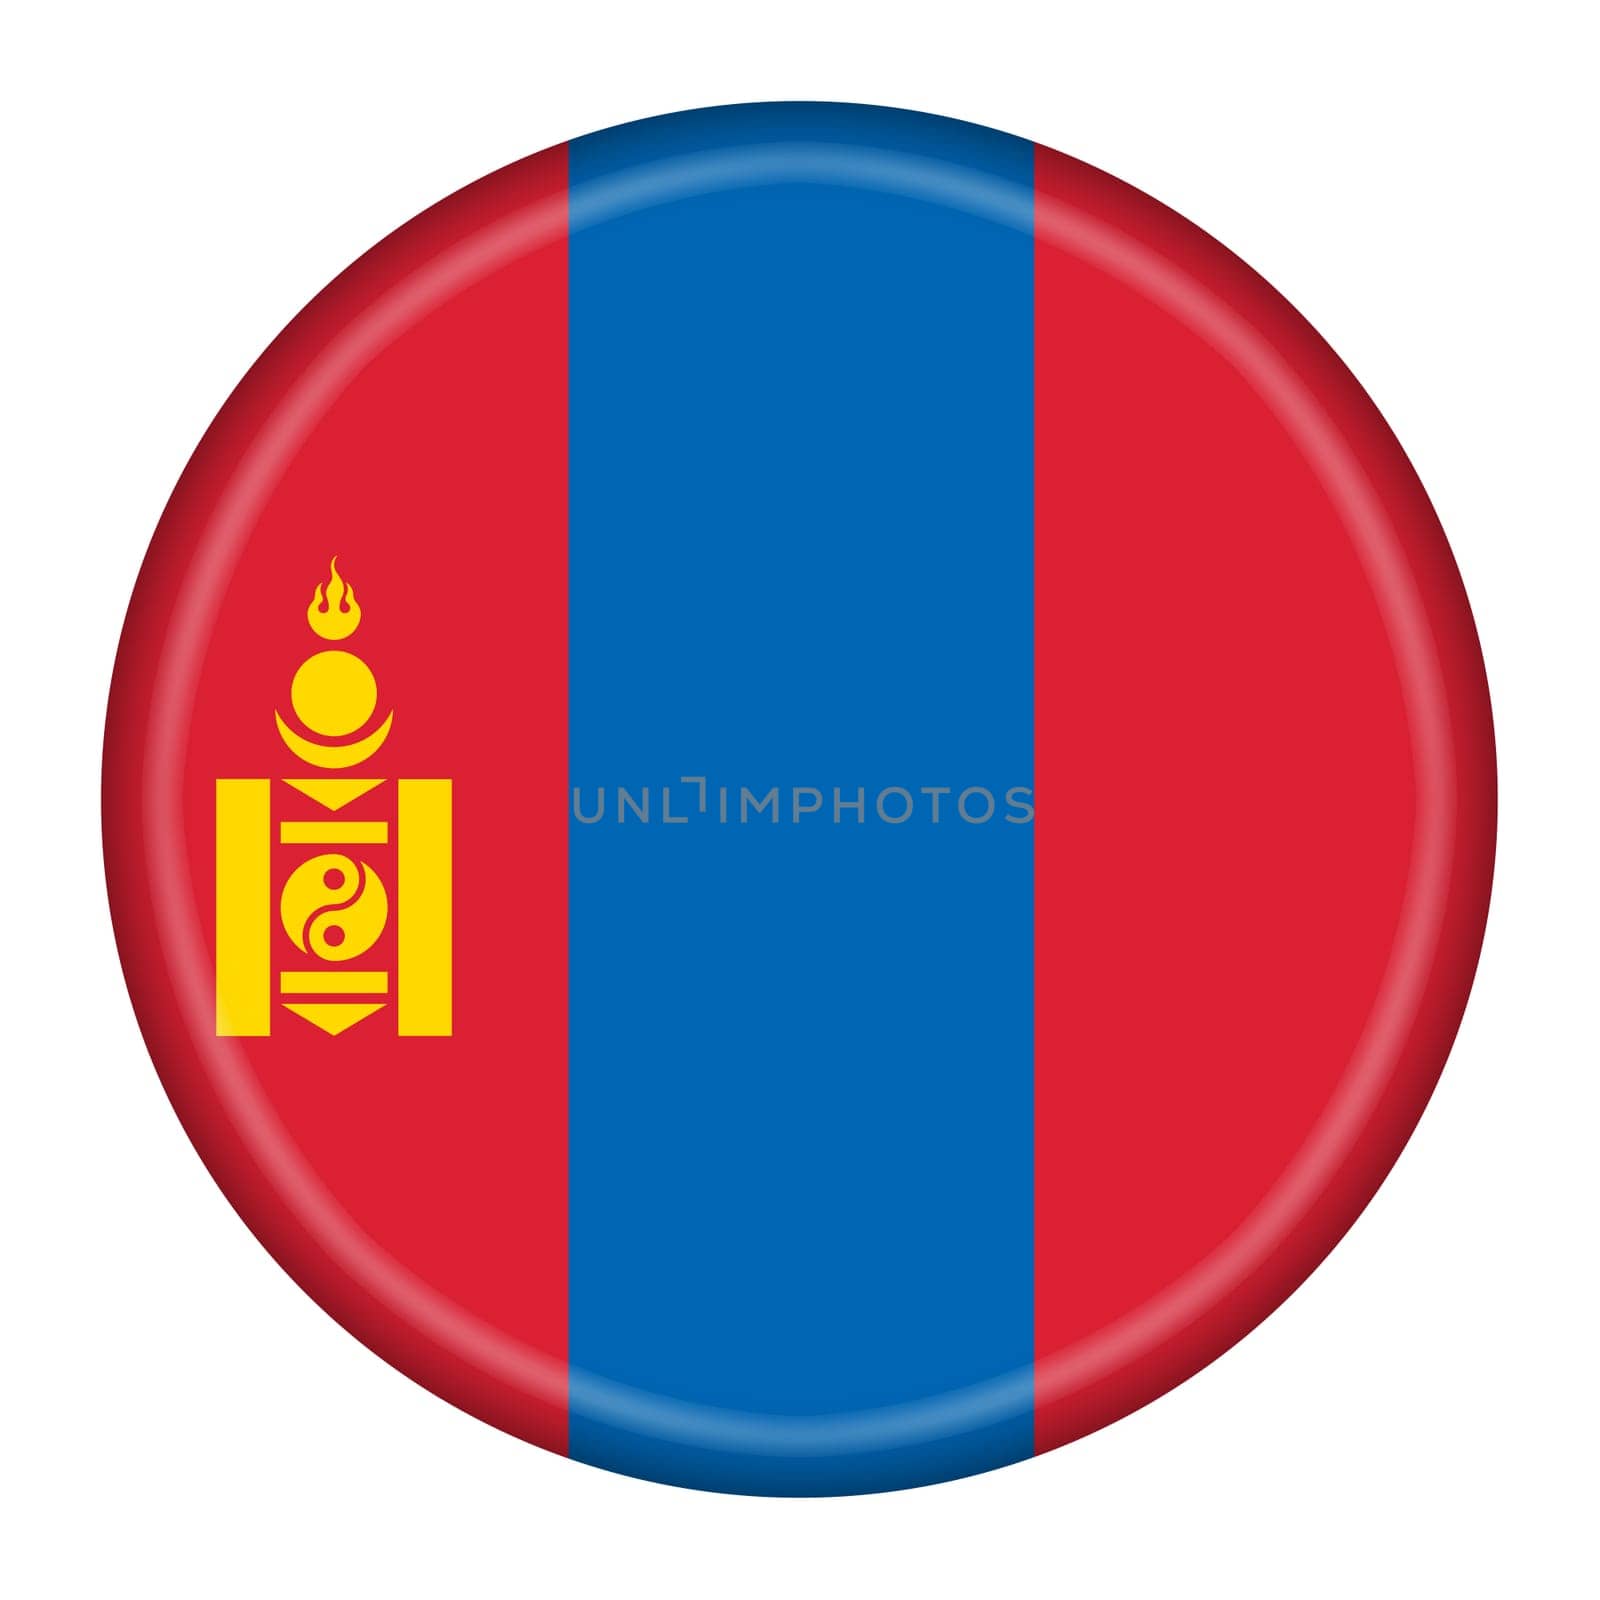 Mongolia flag button 3d illustration with clipping path by VivacityImages